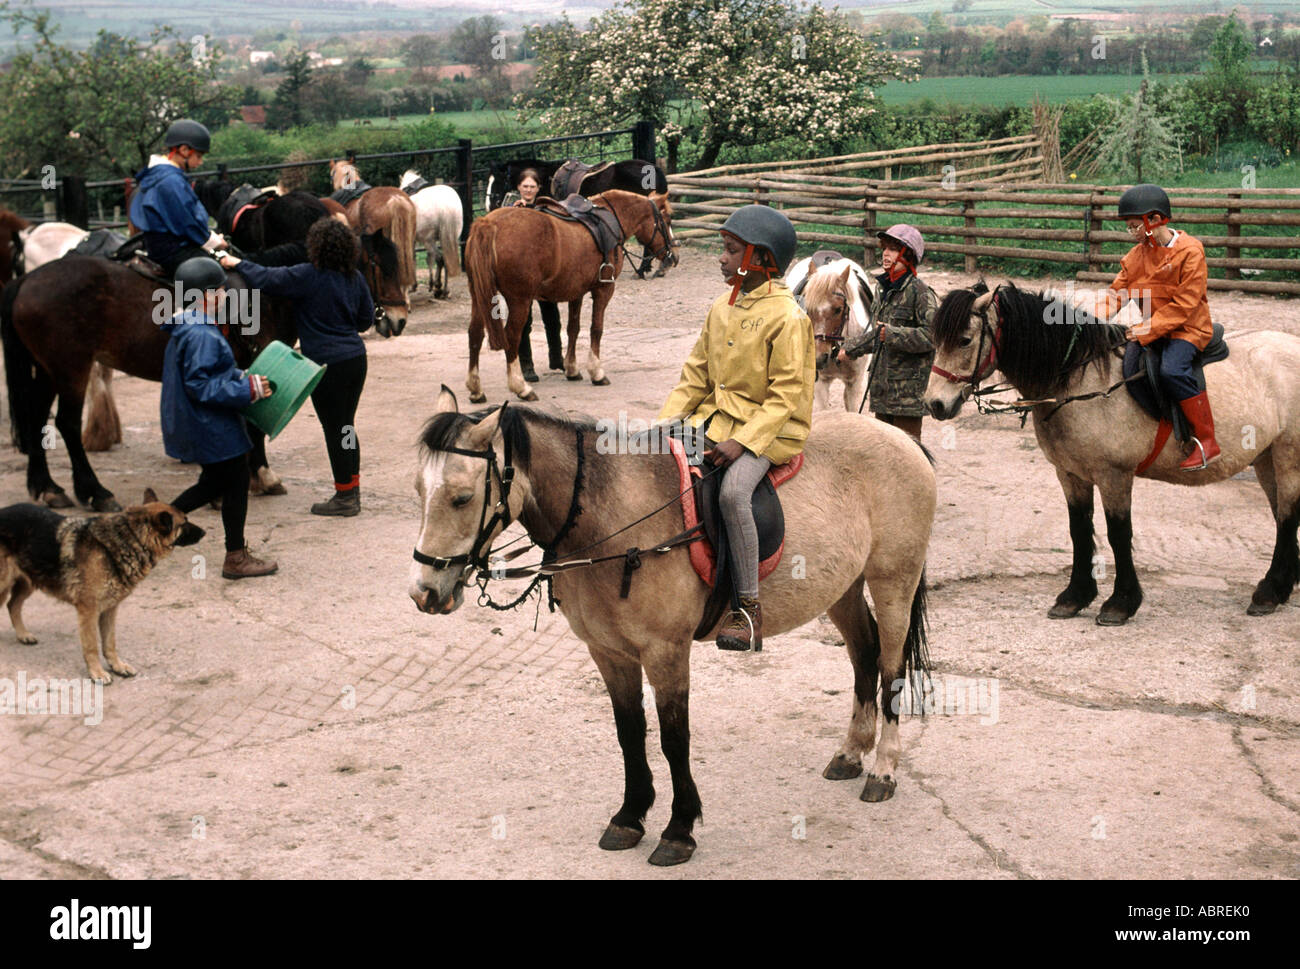 children being taught horesback riding on a primary school adventure outing in the countryside Stock Photo